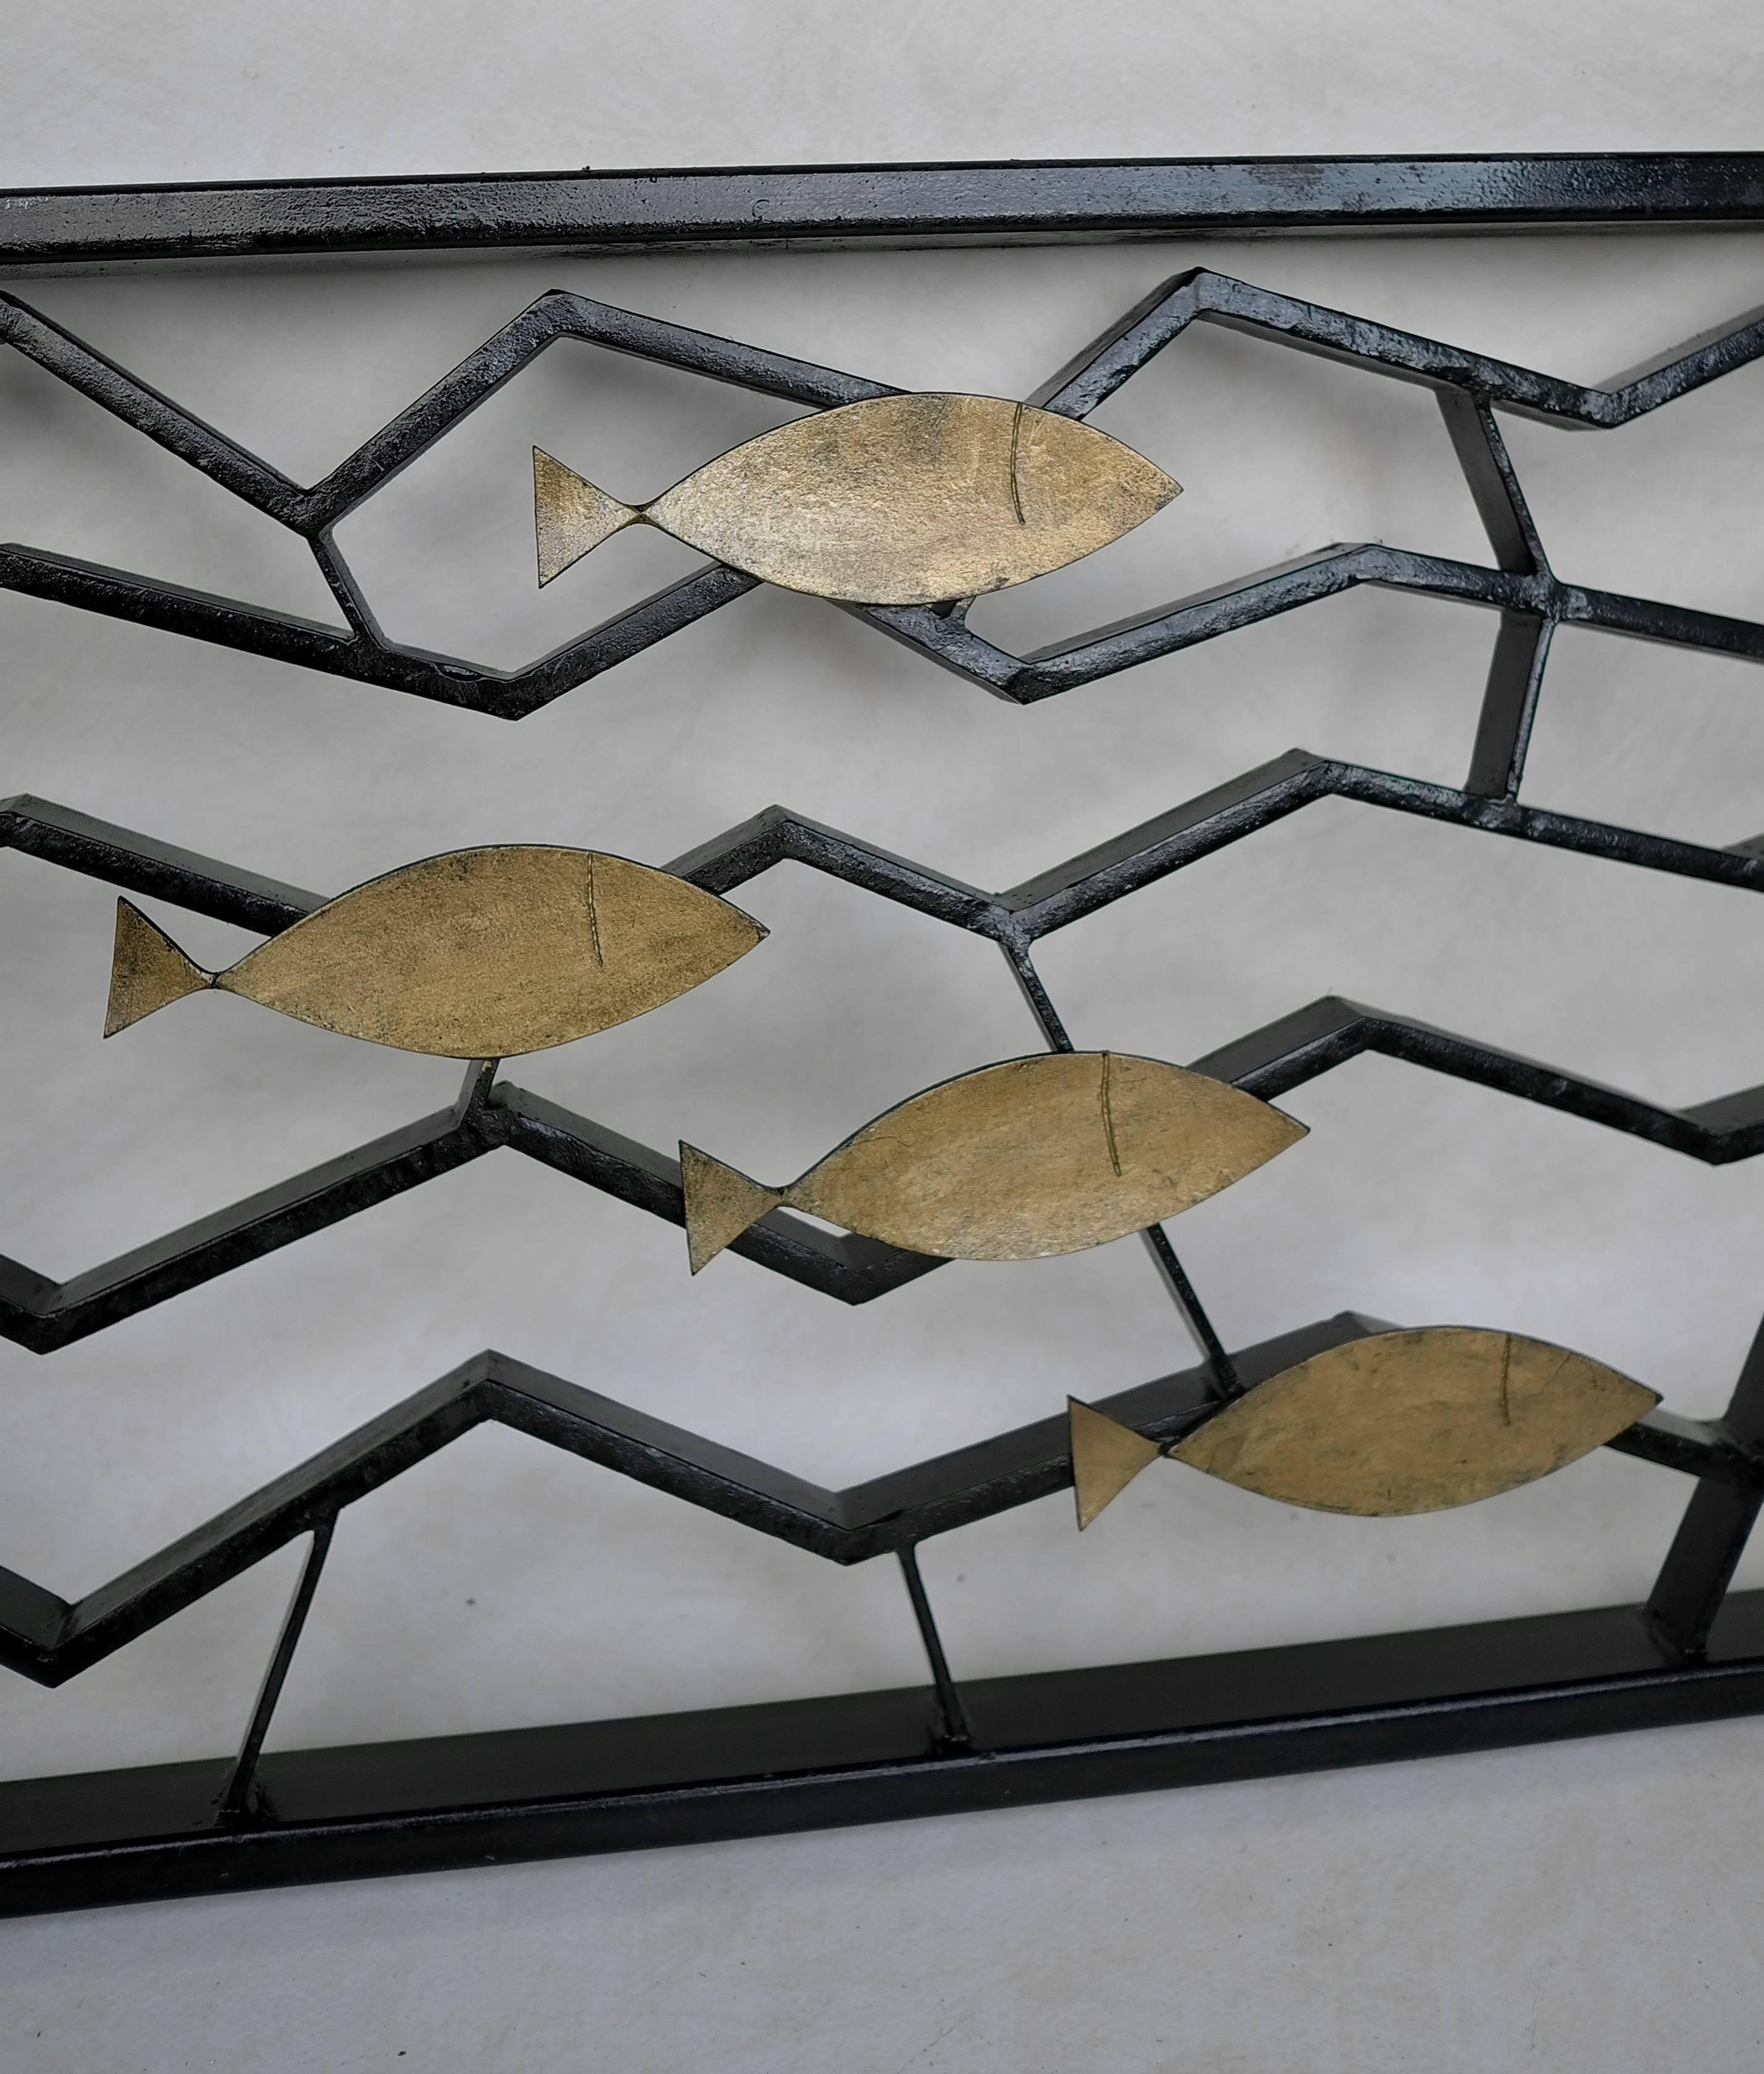 Pair of Metal Geometric fence or art object with golden fish made in Italy, circa 1950s. Priced per piece.